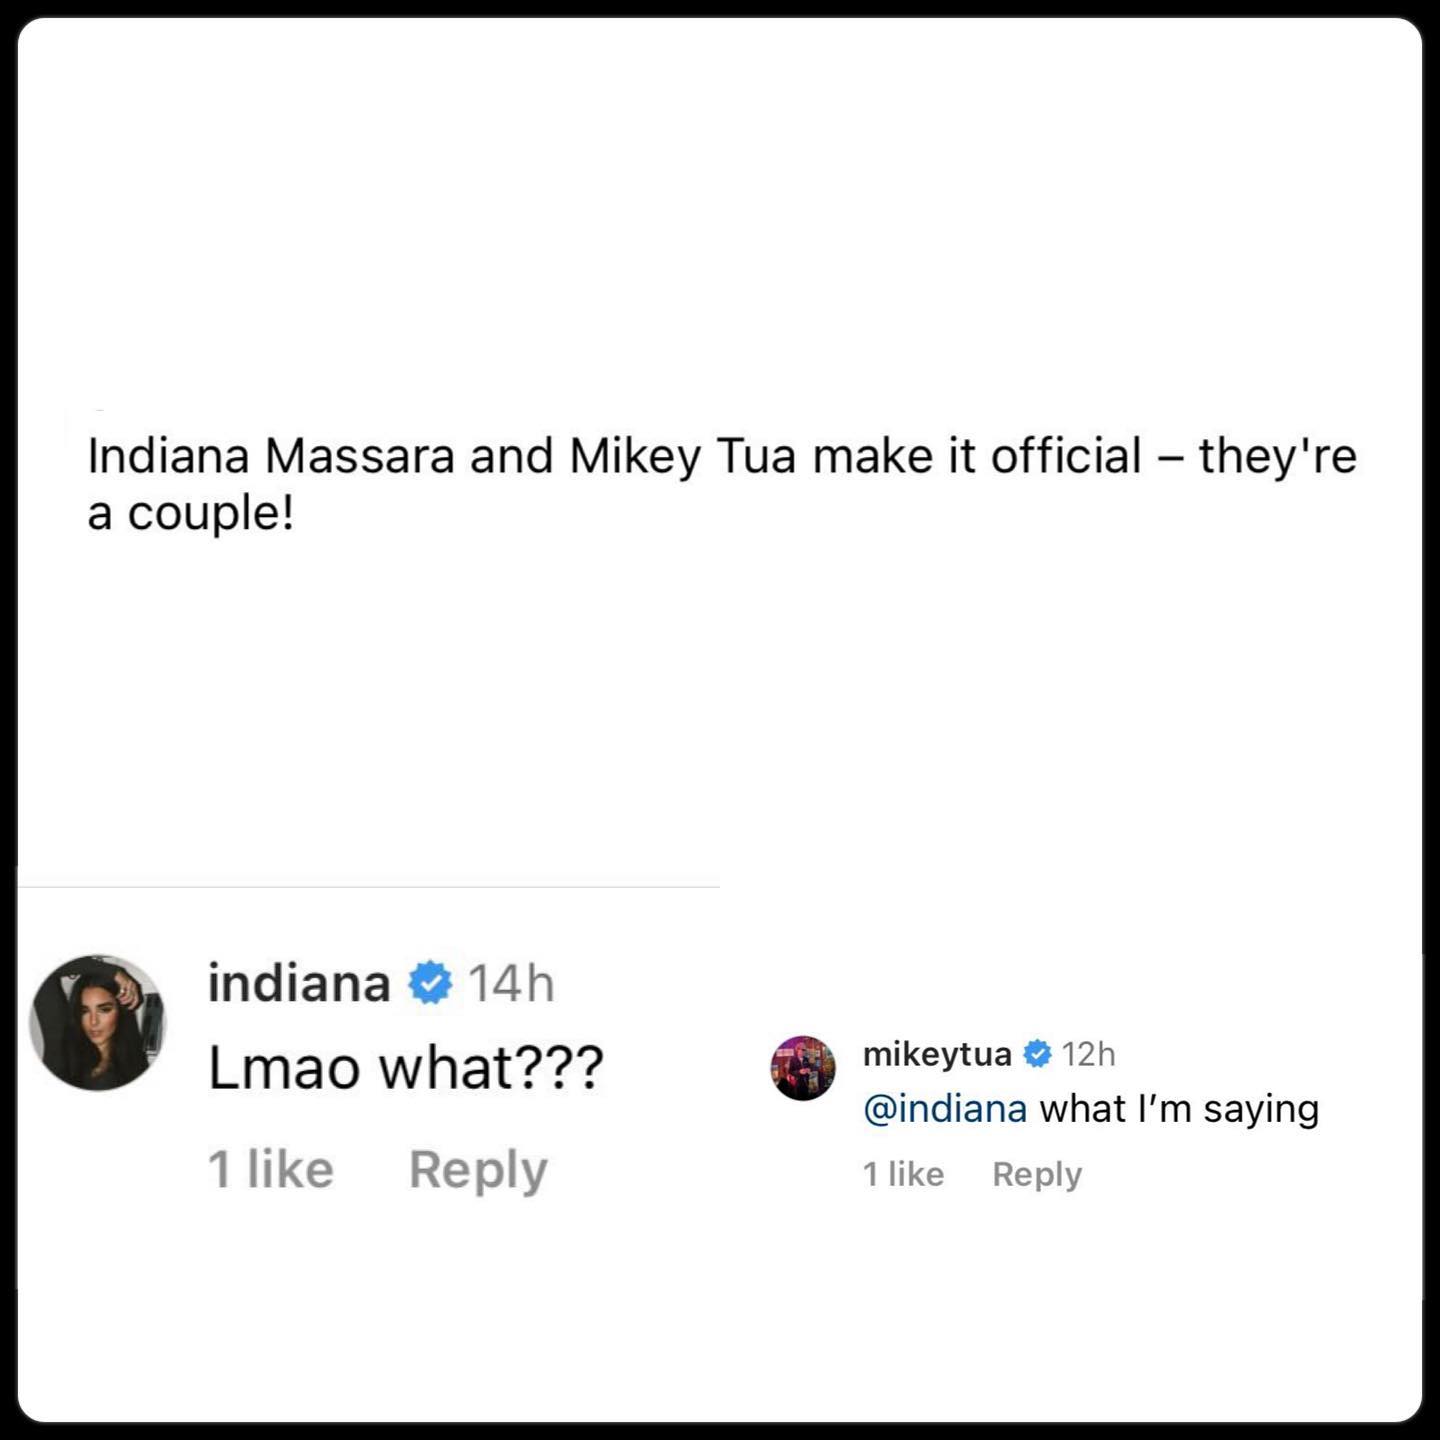 Indiana Massara and rumored boyfriend Mikey Tua deny dating each other